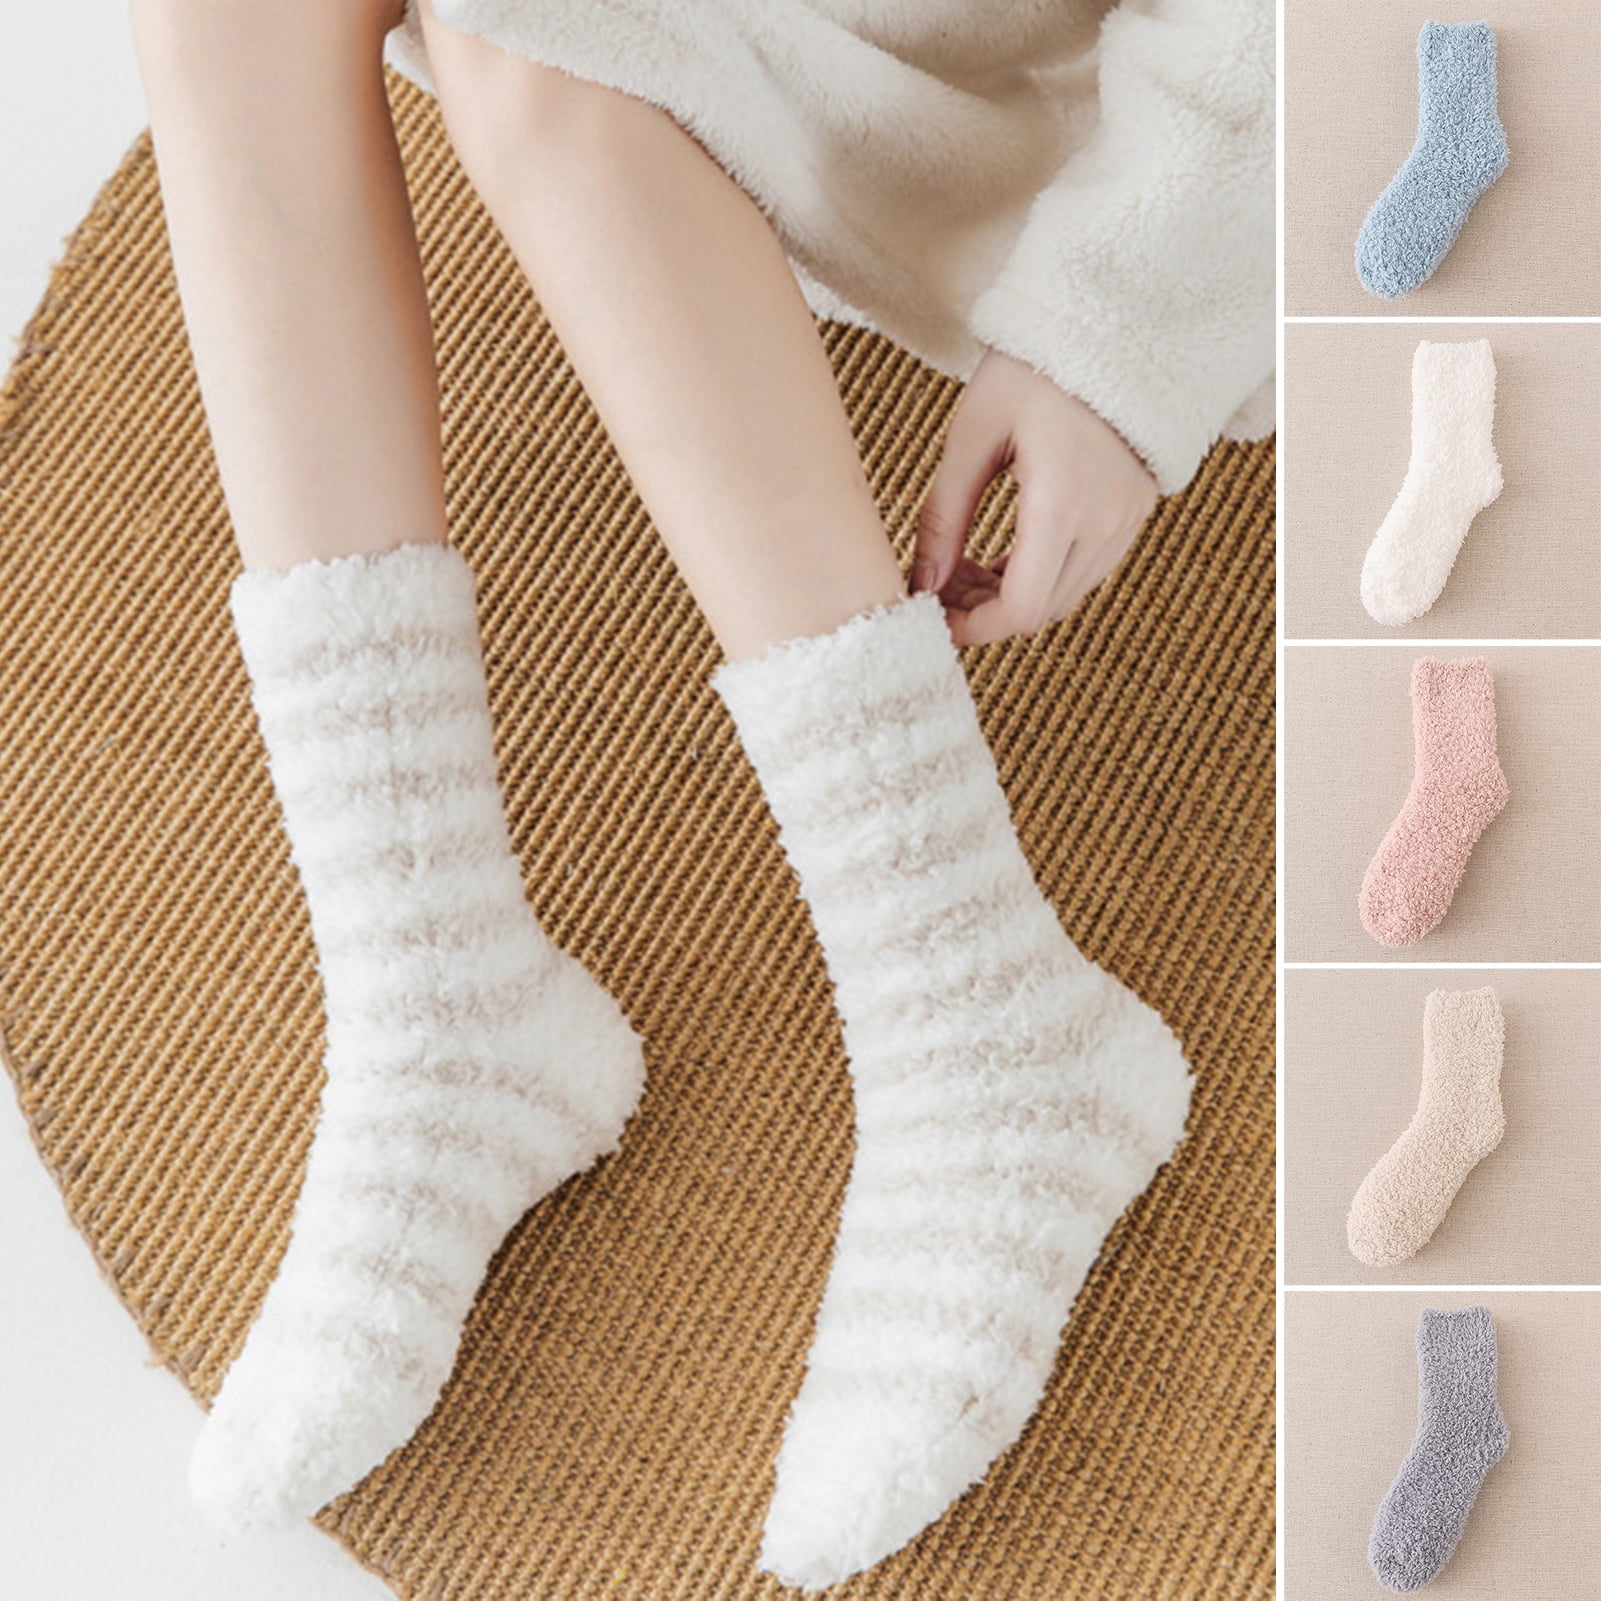 Biplut 1 Pair Floor Socks Striped Fuzzy Stretchy Soft Mid-calf Cold  Resistant Comfortable Winter Thermal Women Indoor Home Slipper Sleeping  Socks for